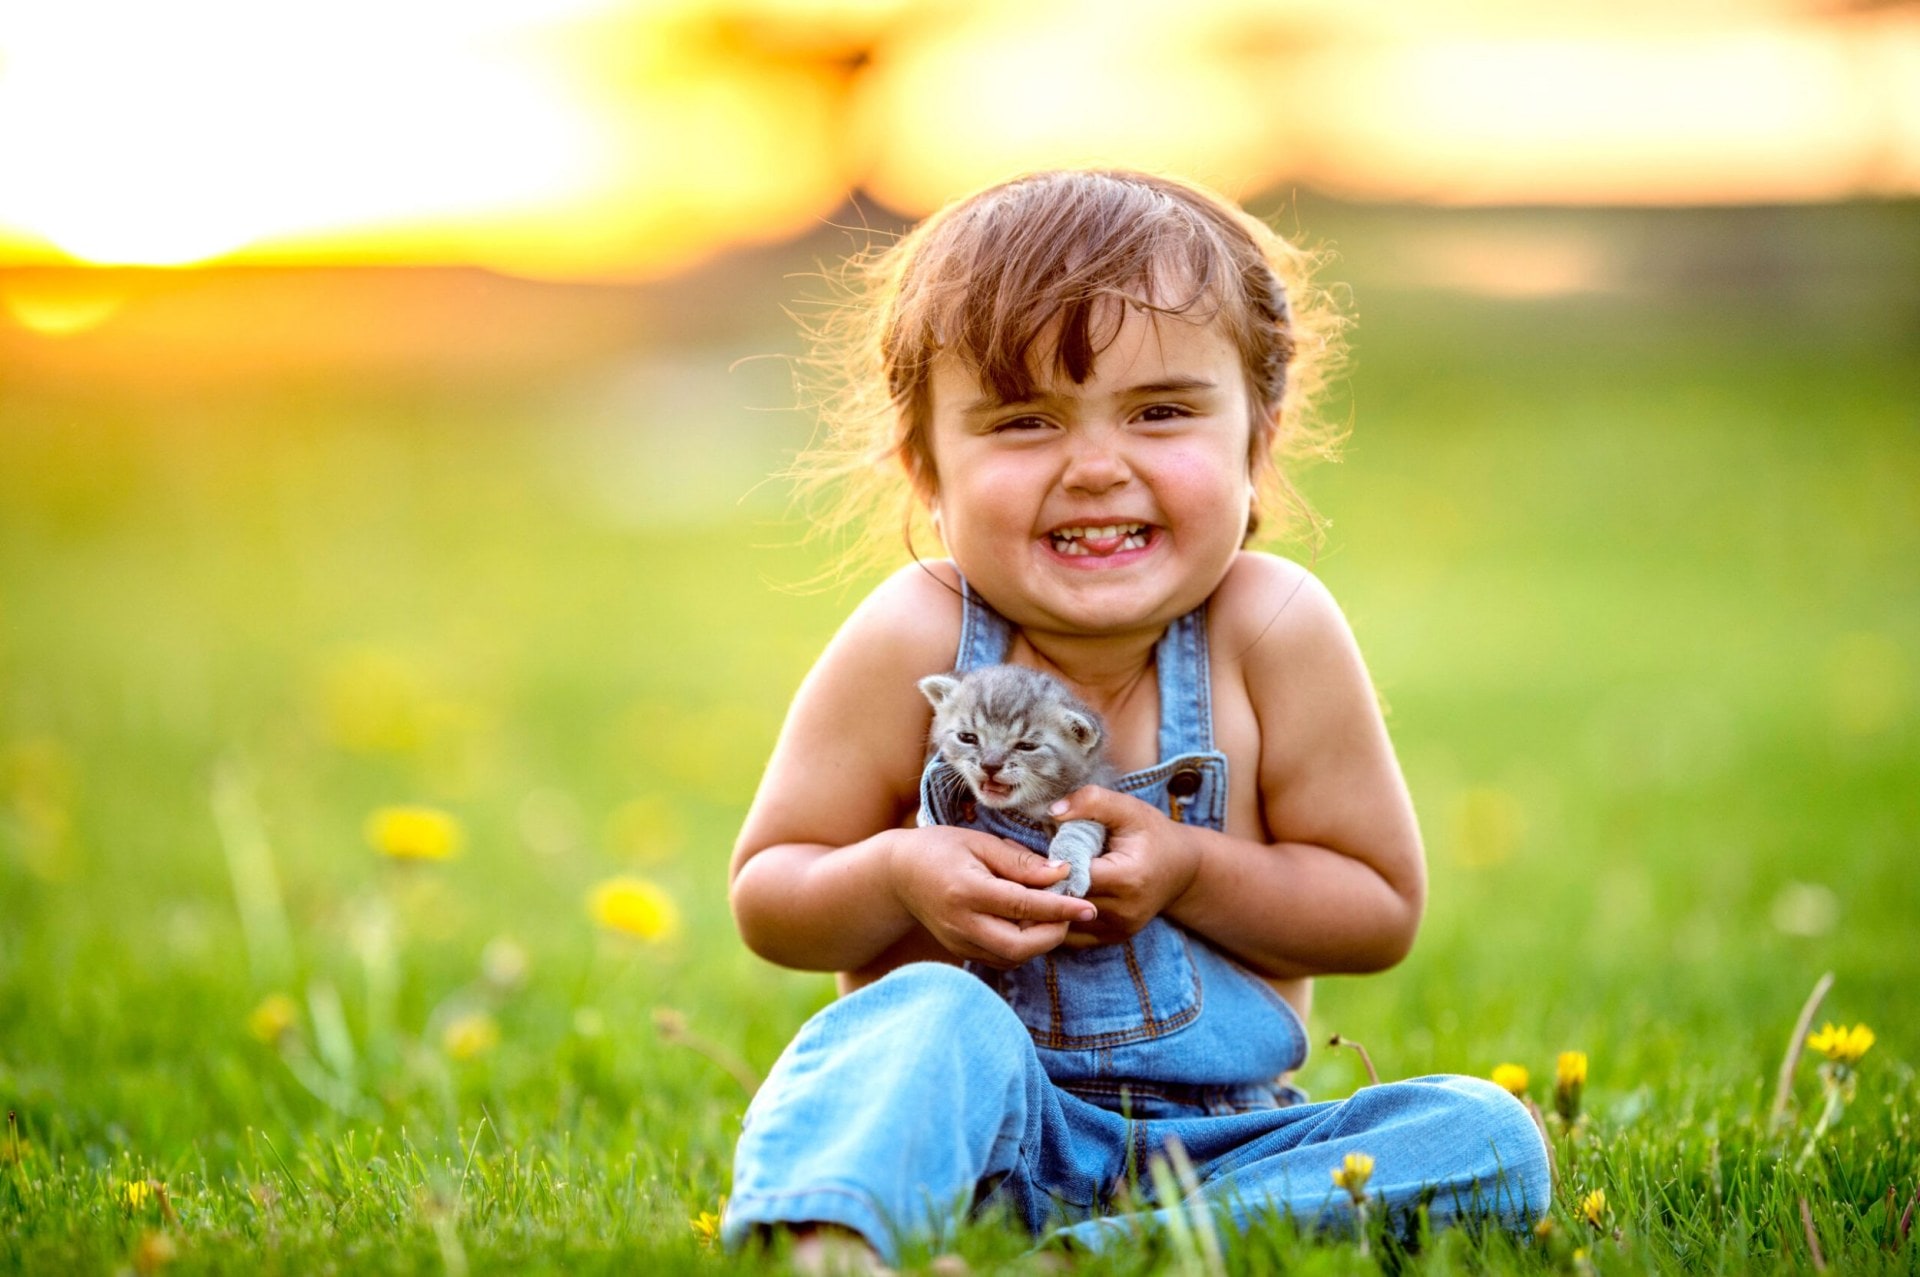 Toddler in denim overalls with tiny grey kitten